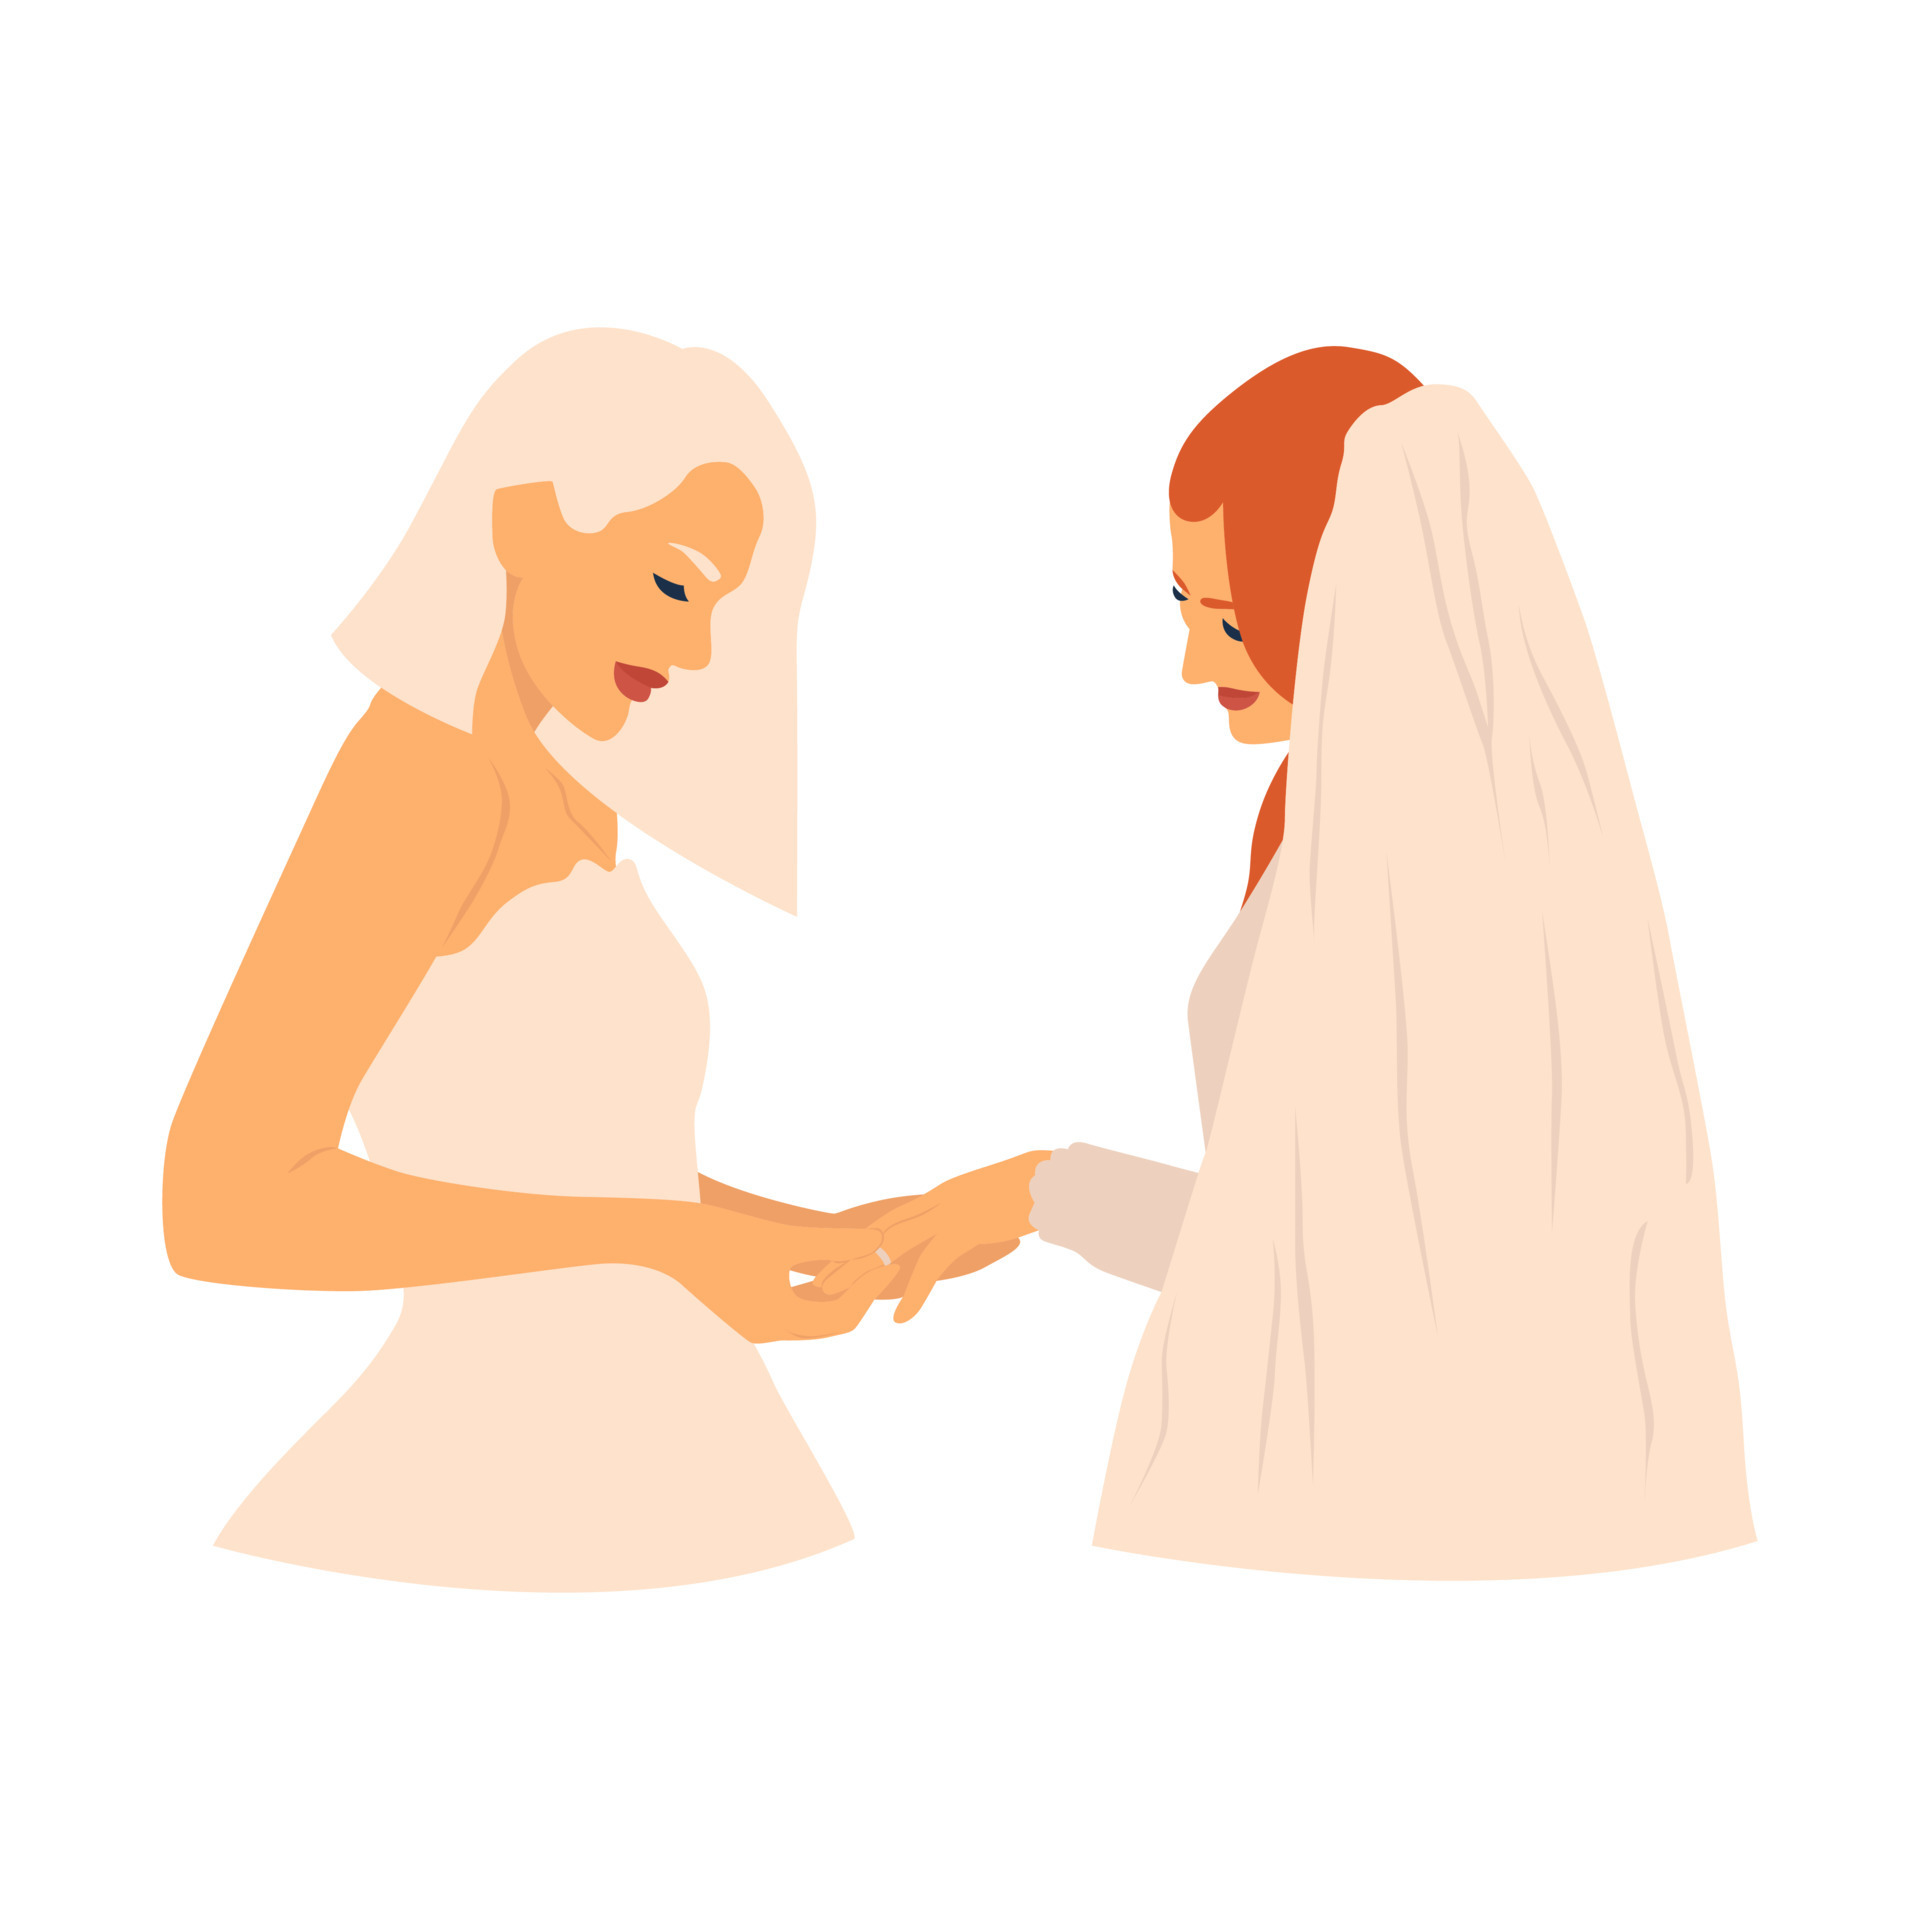 Silhouette of smiling lesbians couple wearing wedding rings on wedding day. Happy same sex spouses celebrating marriage. LGBT rights. Homosexual couples